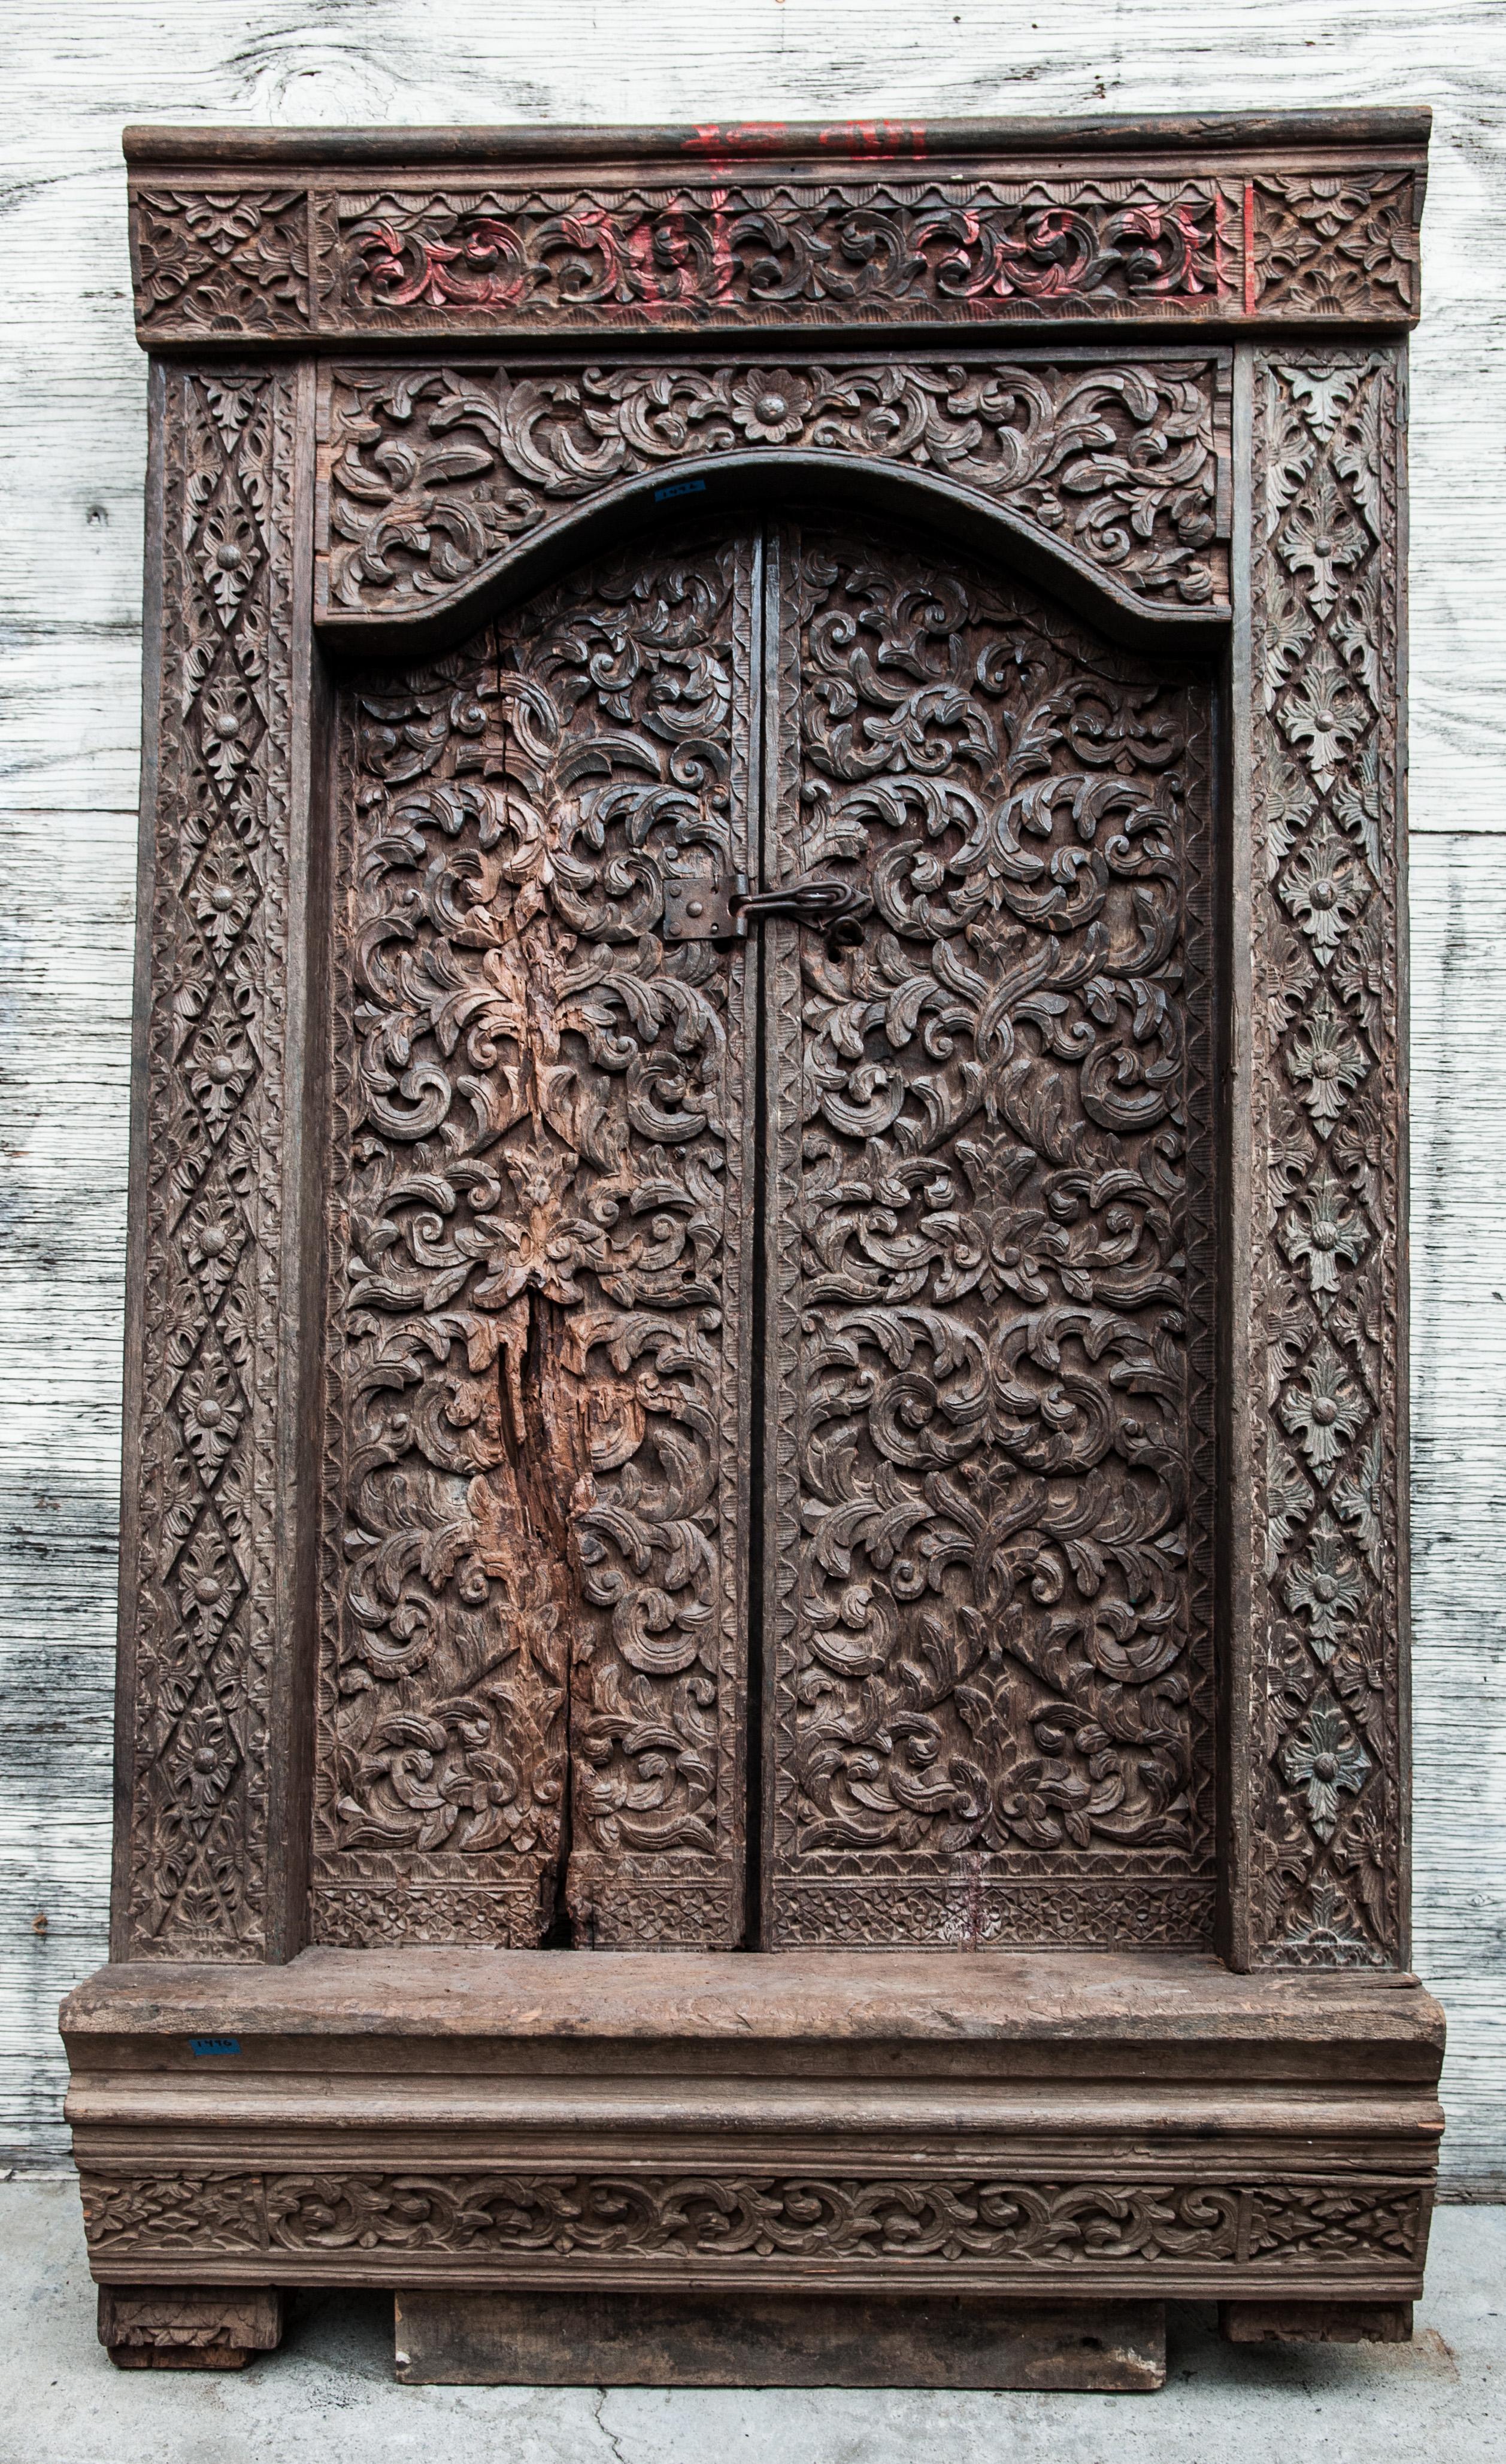 Old carved door and frame from Sumatra. Merbau wood. Early to mid-20th century. 
This rare and wonderfully rendered door from Sumatra, most likely from the area of Lampung, or perhaps Minangkabau, is carved from merbau wood, an extremely dense